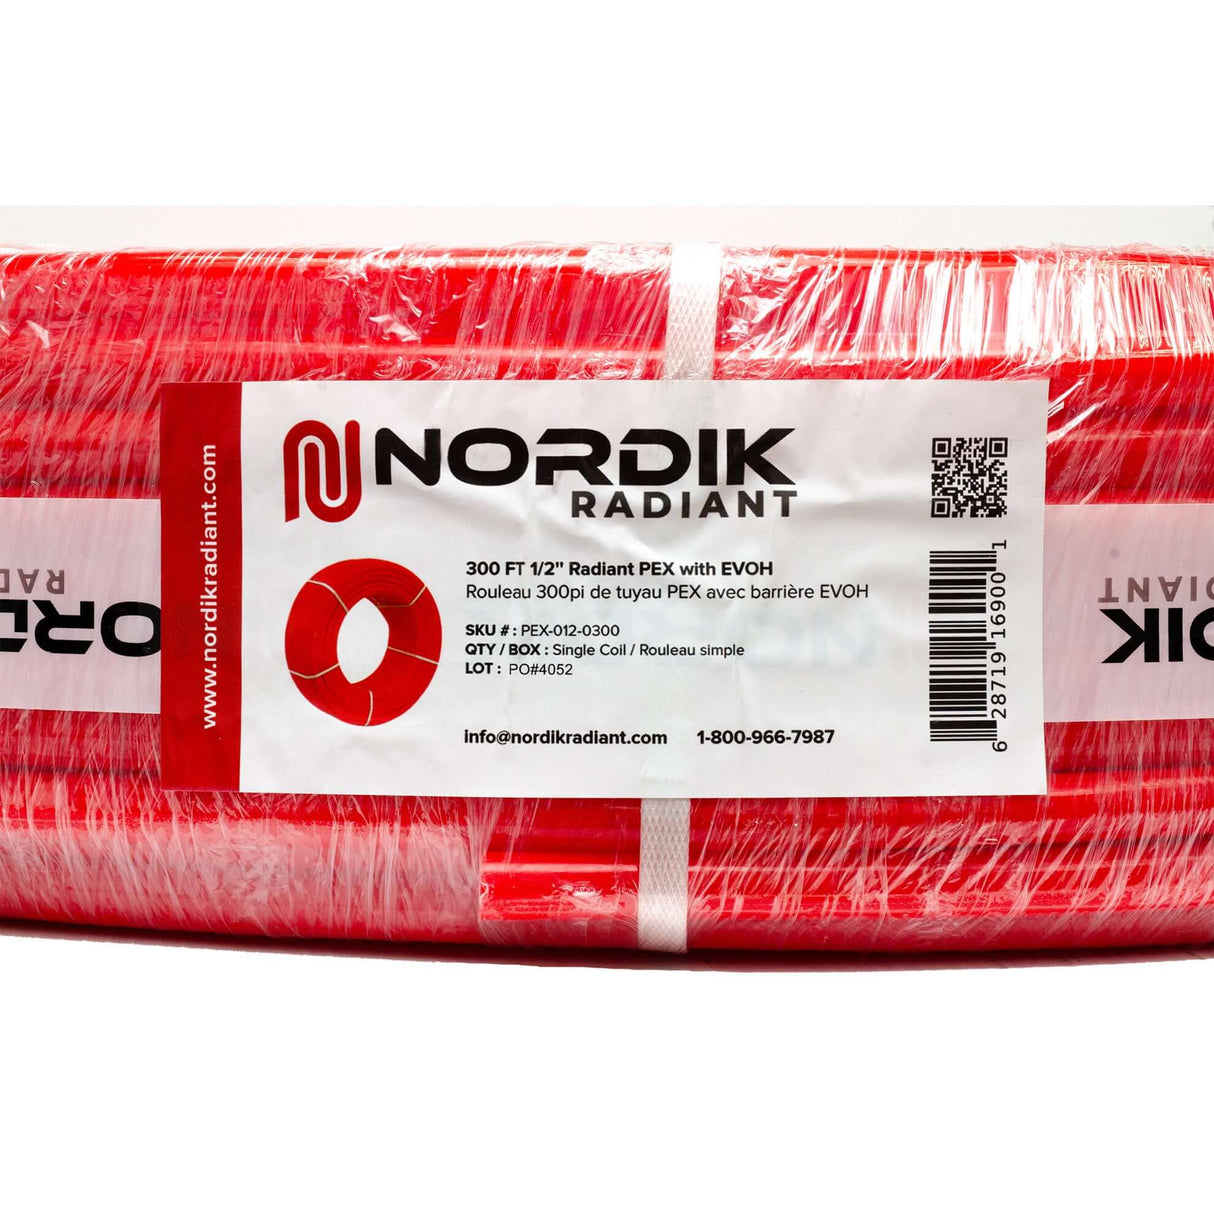 1/2” Red PEX tubing with EVOH barrier - 300 ft. coil. - label